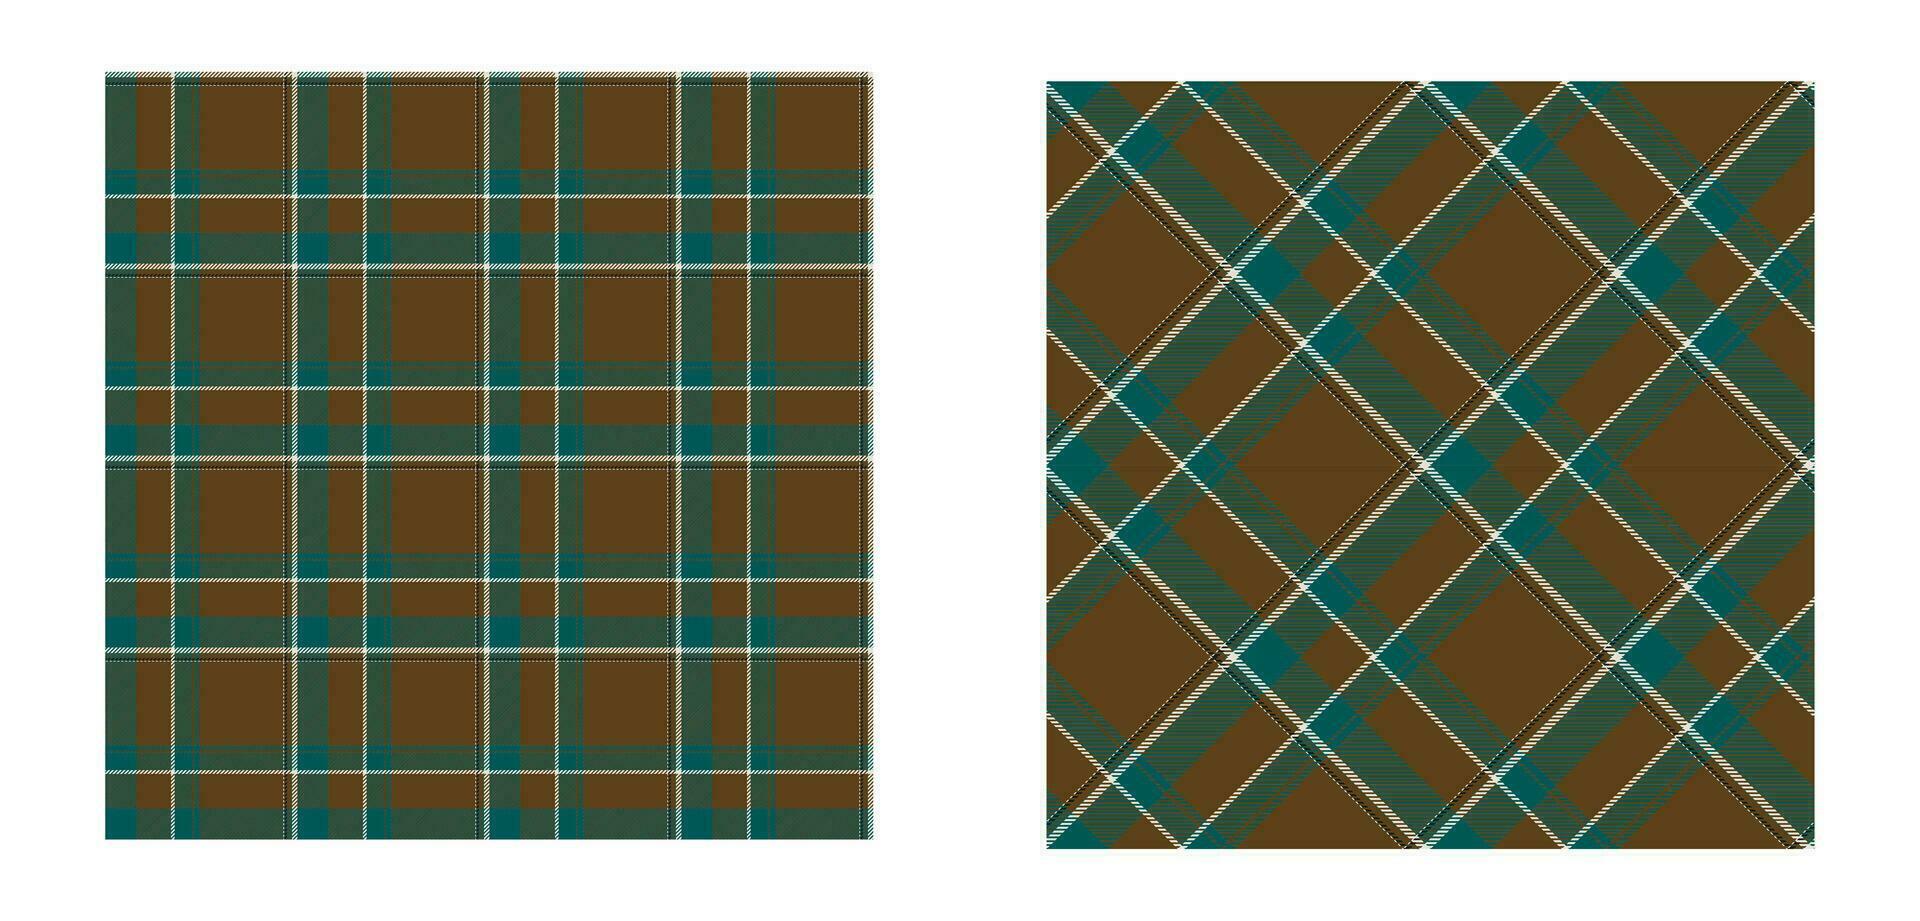 Plaid pattern in brown and green. Vector herringbone textured seamless tartan check plaid background for flannel shirt or other modern autumn winter textile print.